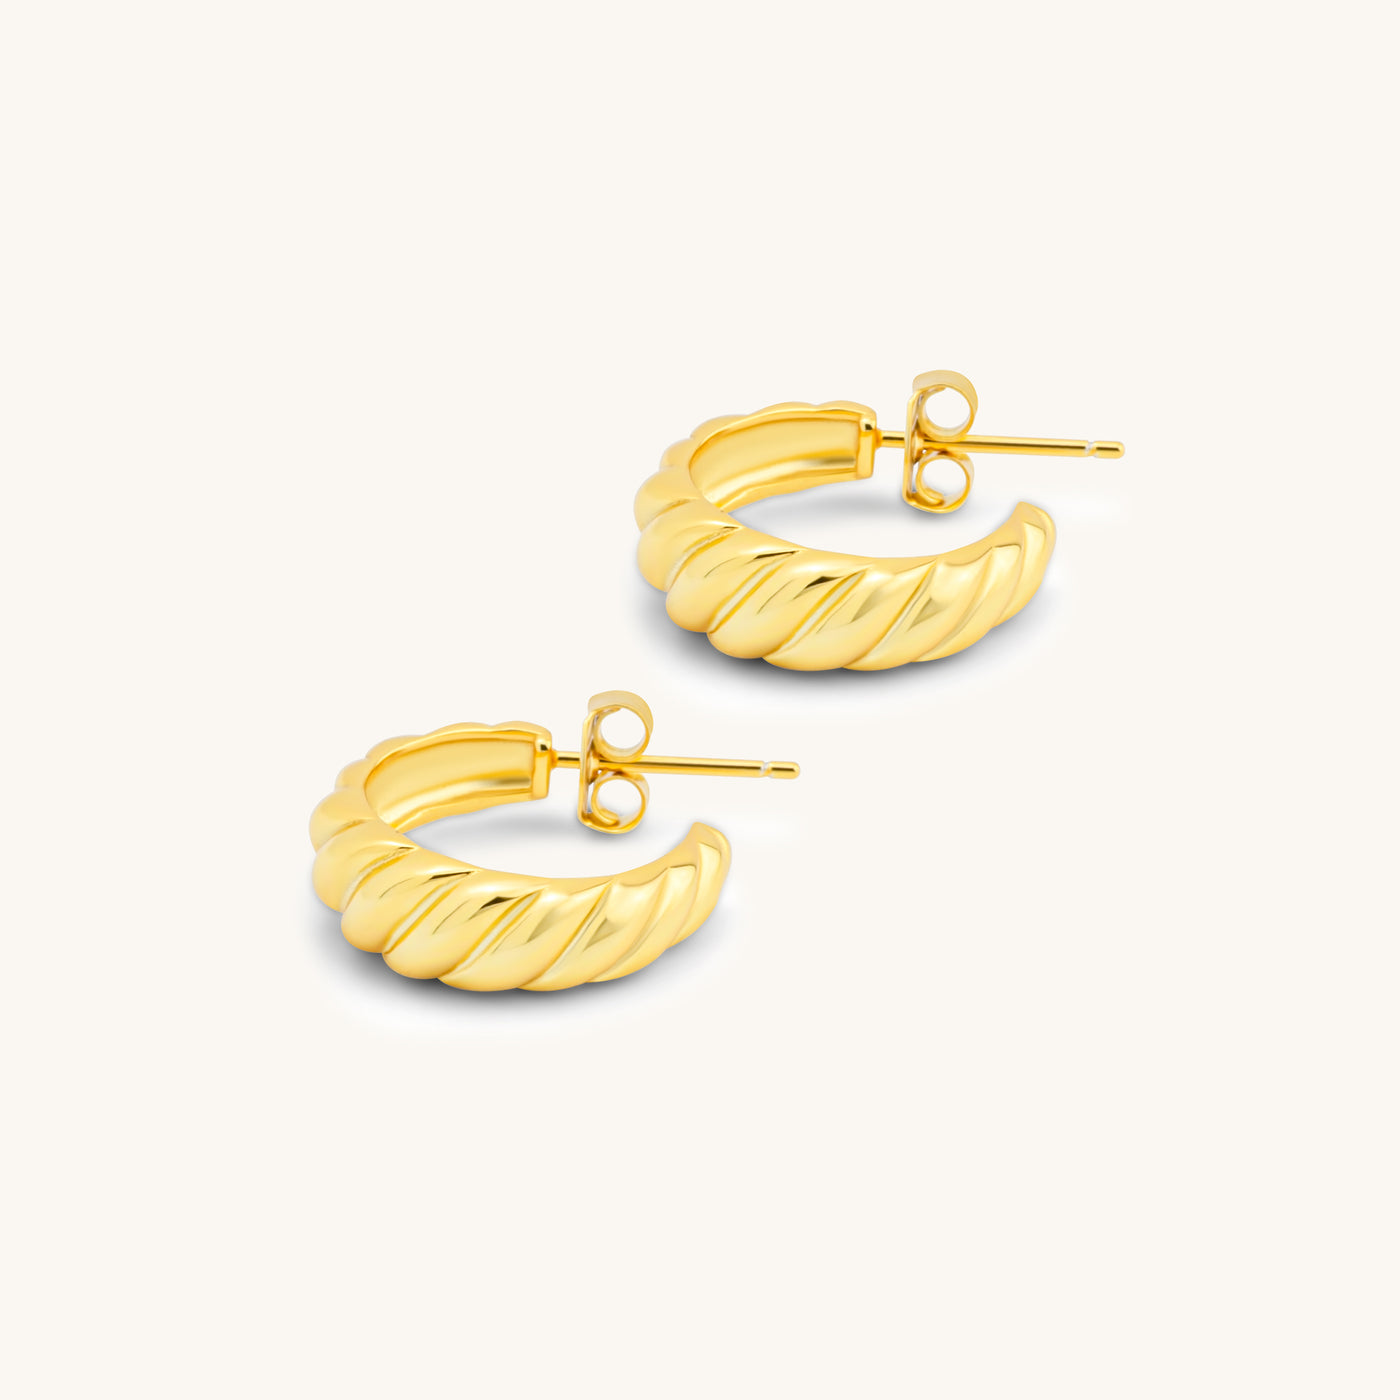 INTTN Croissant Dôme Earrings Bold Huggie Hoops Women's Earing Thick 18k gold layered on 925 sterling silver